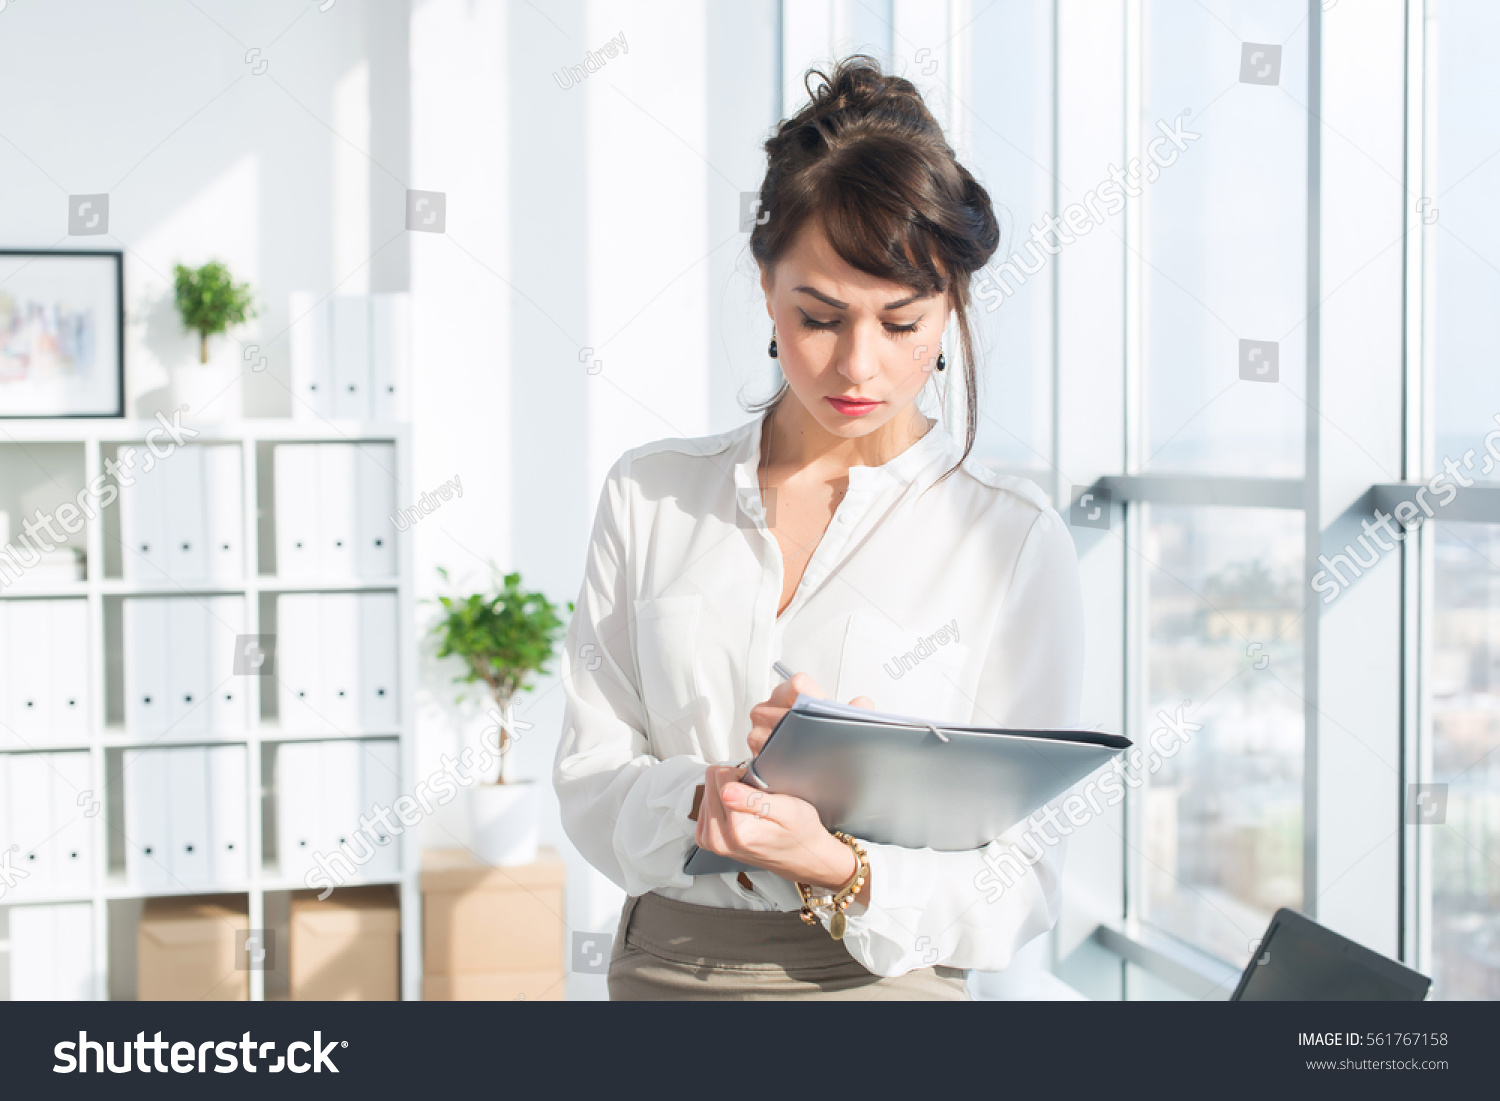 stock-photo-close-up-portrait-of-a-caucasian-female-office-assistant-at-her-workplace-confident-clerk-561767158.jpg